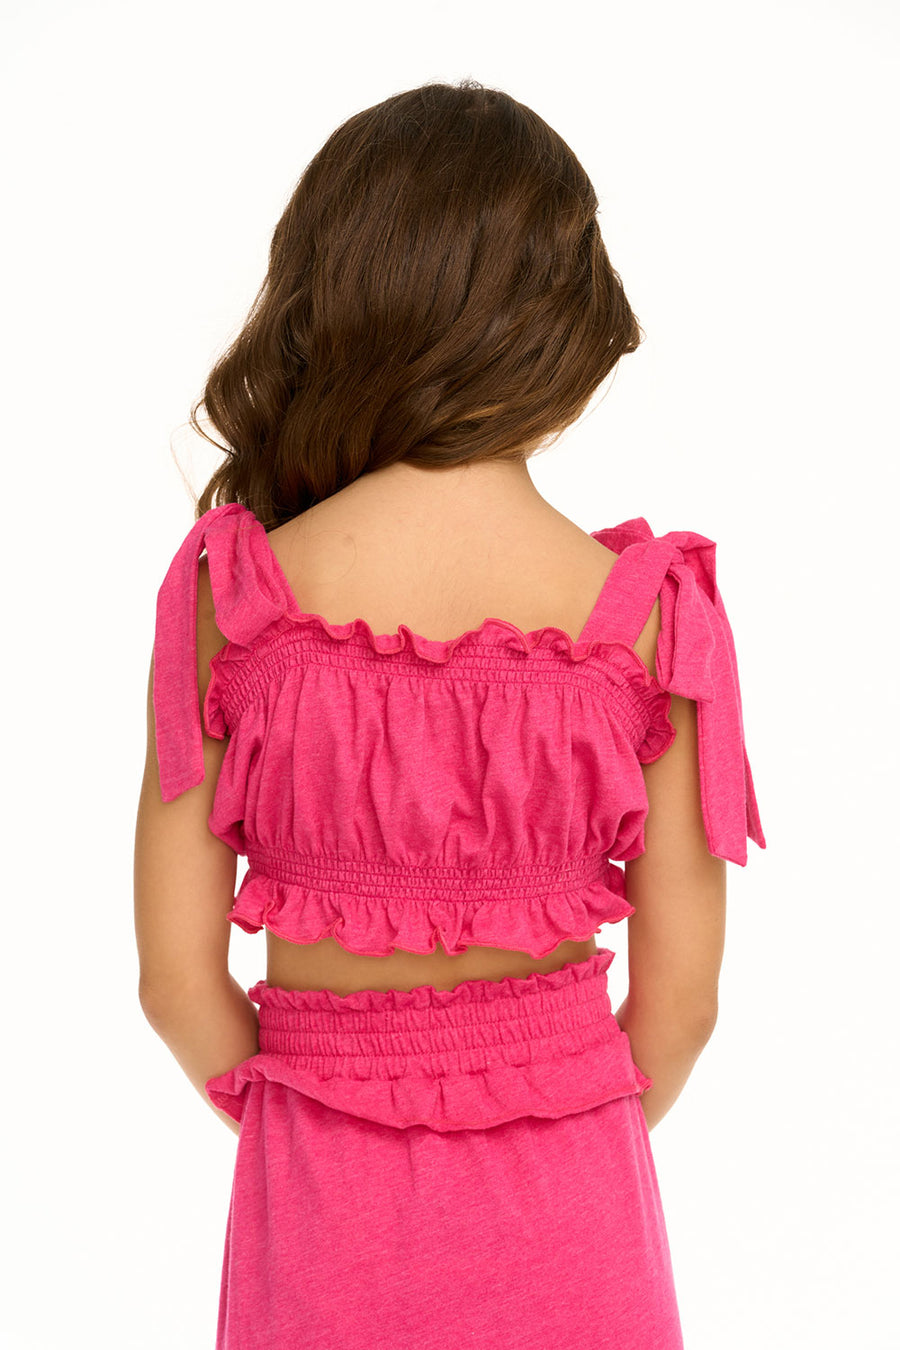 Mimi Hot Pink Tank Top GIRLS chaserbrand